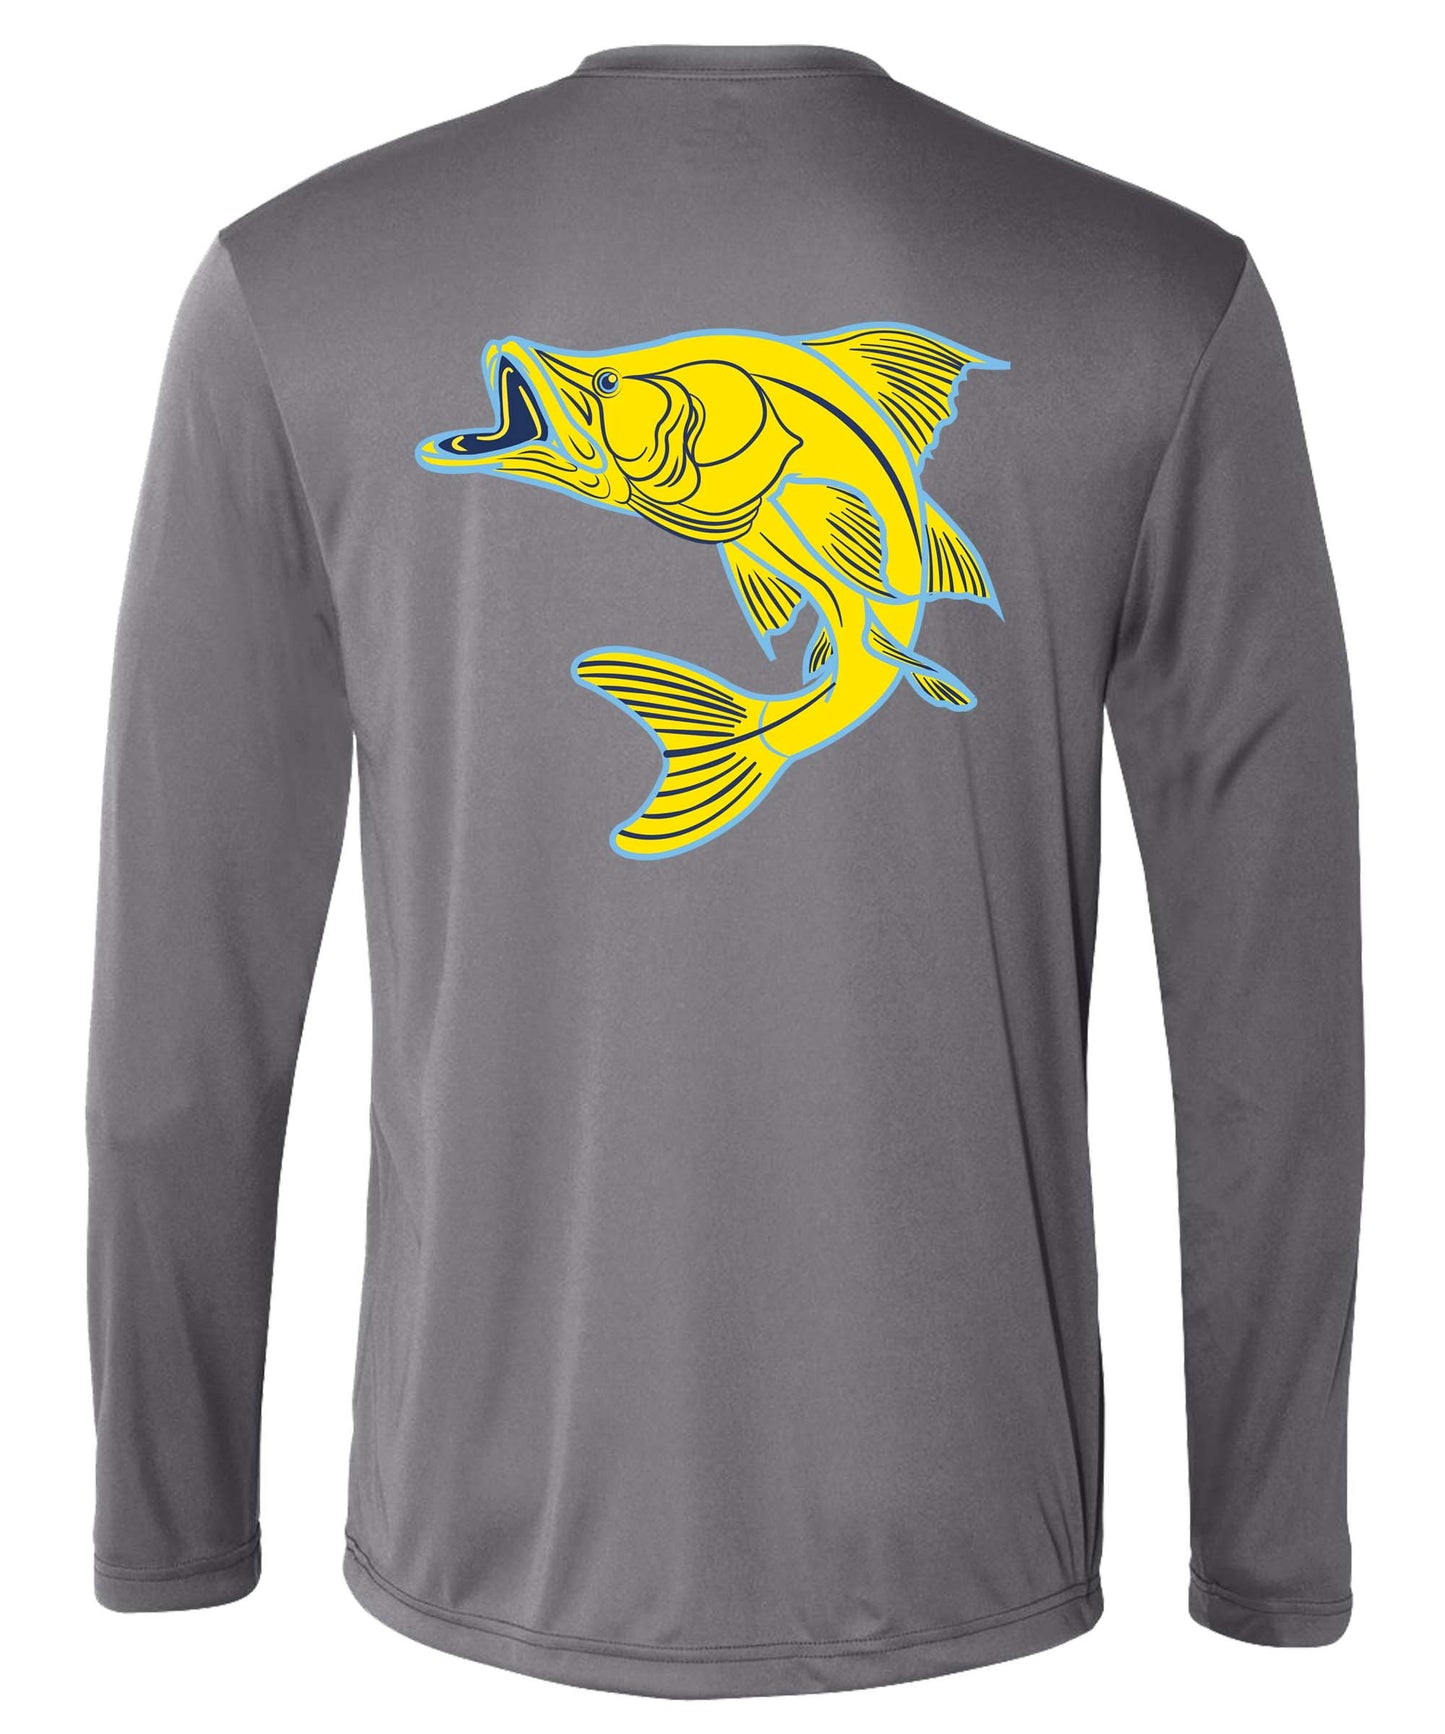 Snook Performance Dry-Fit Fishing Sun Protection shirts-Gray long sleeve